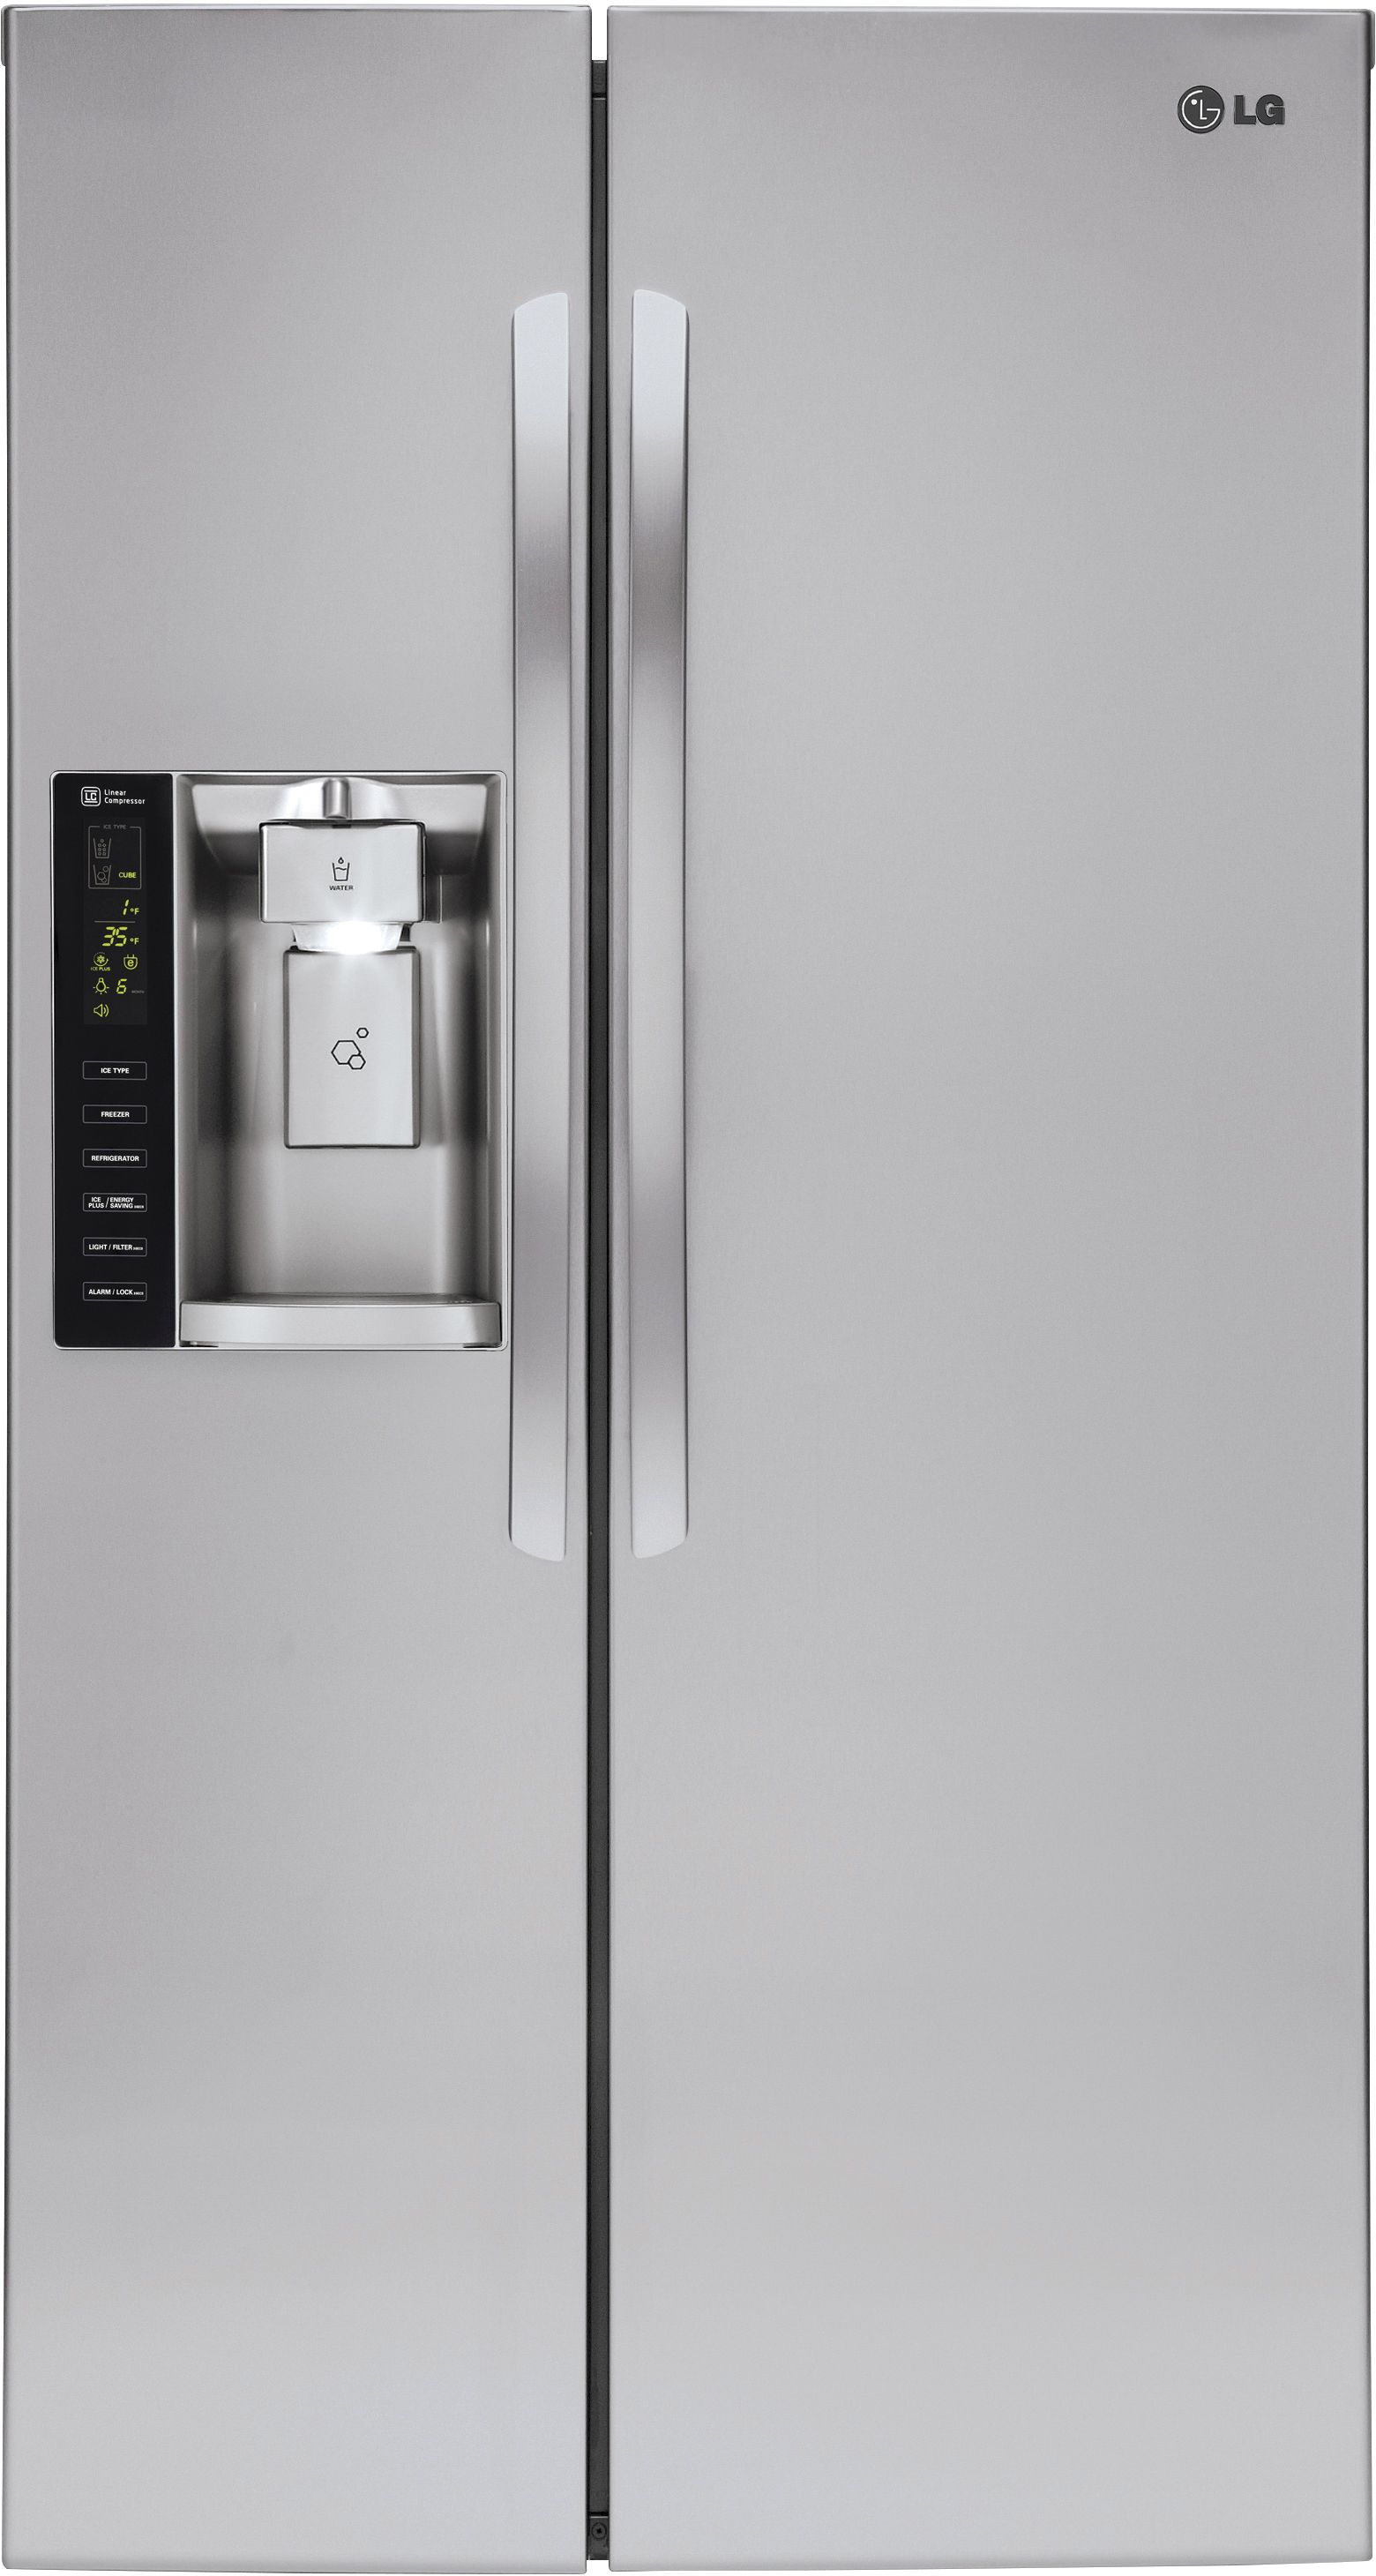 LG 26.2 Cu. Ft. Stainless Steel Side-By-Side Refrigerator